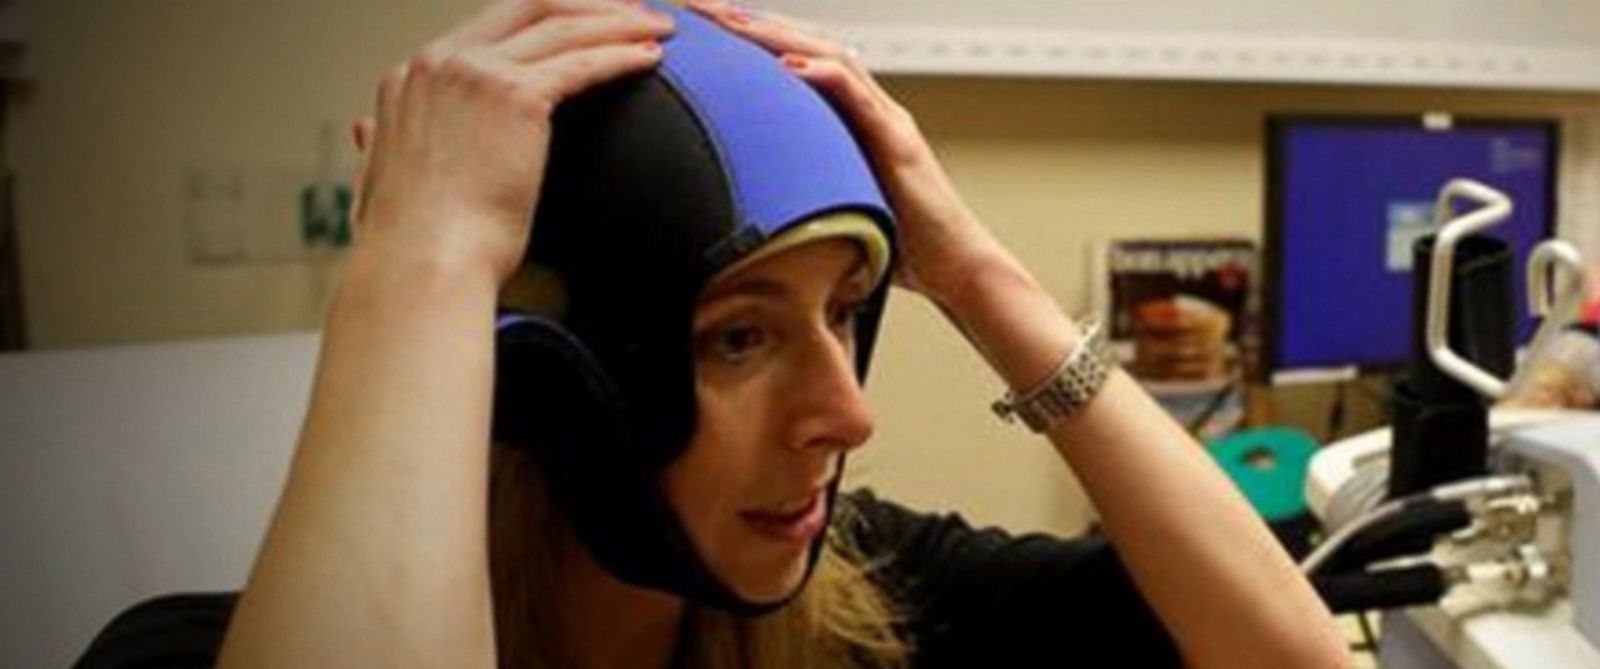 FDA Approves 'Cold Cap' That Reduces Hair Loss During Cancer Treatment